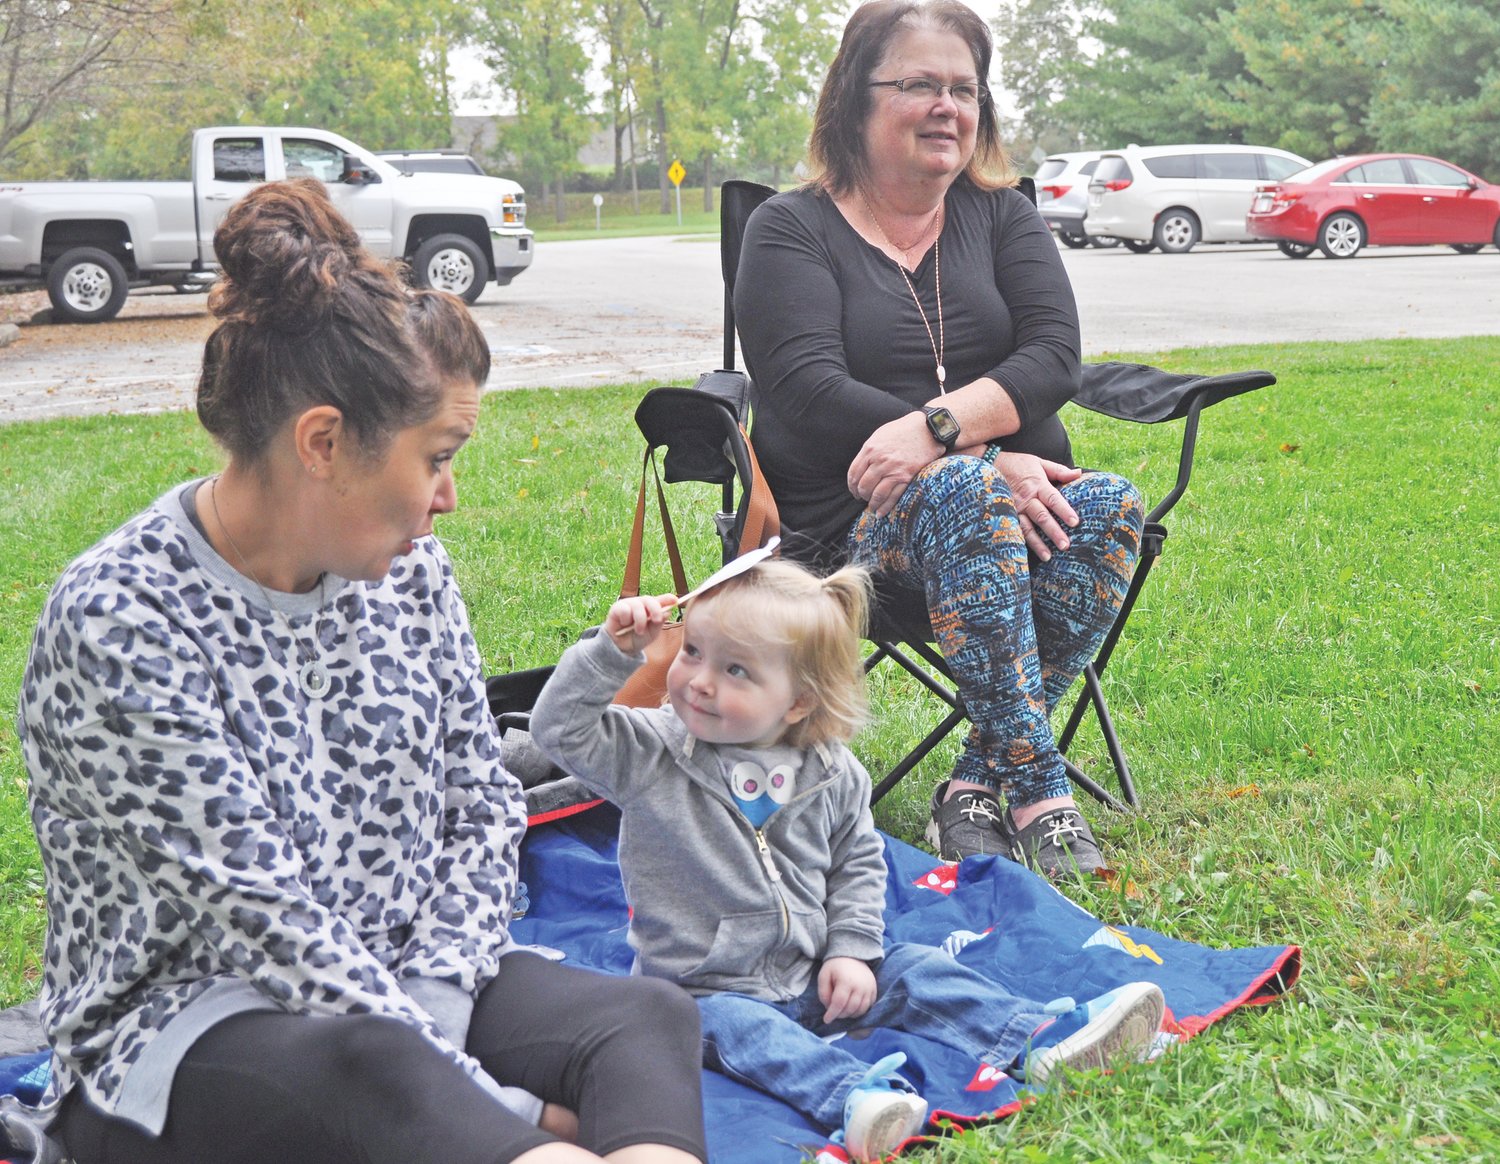 Josie Roberts, 2, plays an activity with mom Chelsea Roberts and grandma Debbie Carter at the Crawfordsville District Public Library’s Story Time at the Sugar Creek Trail on Wednesday. The library has placed two stories along the trail for families to read during October. Story Time, which is designed for children under 5, takes place at 10 a.m. Wednesdays on the trail. Another children’s program, Wiggle and Giggle, a music and movement activity, takes place at 10 a.m. Fridays at Pike Place. Both events are held weather-permitting and no registration is needed. The Elementary Explorers, a program for children in grades K-5, is held at 4 p.m. Tuesdays at the library pavilion, weather-permitting. Registration is required by calling 765-362-2242 ext. 2. The library’s Pumpkin Book Character Contest begins Oct. 24.